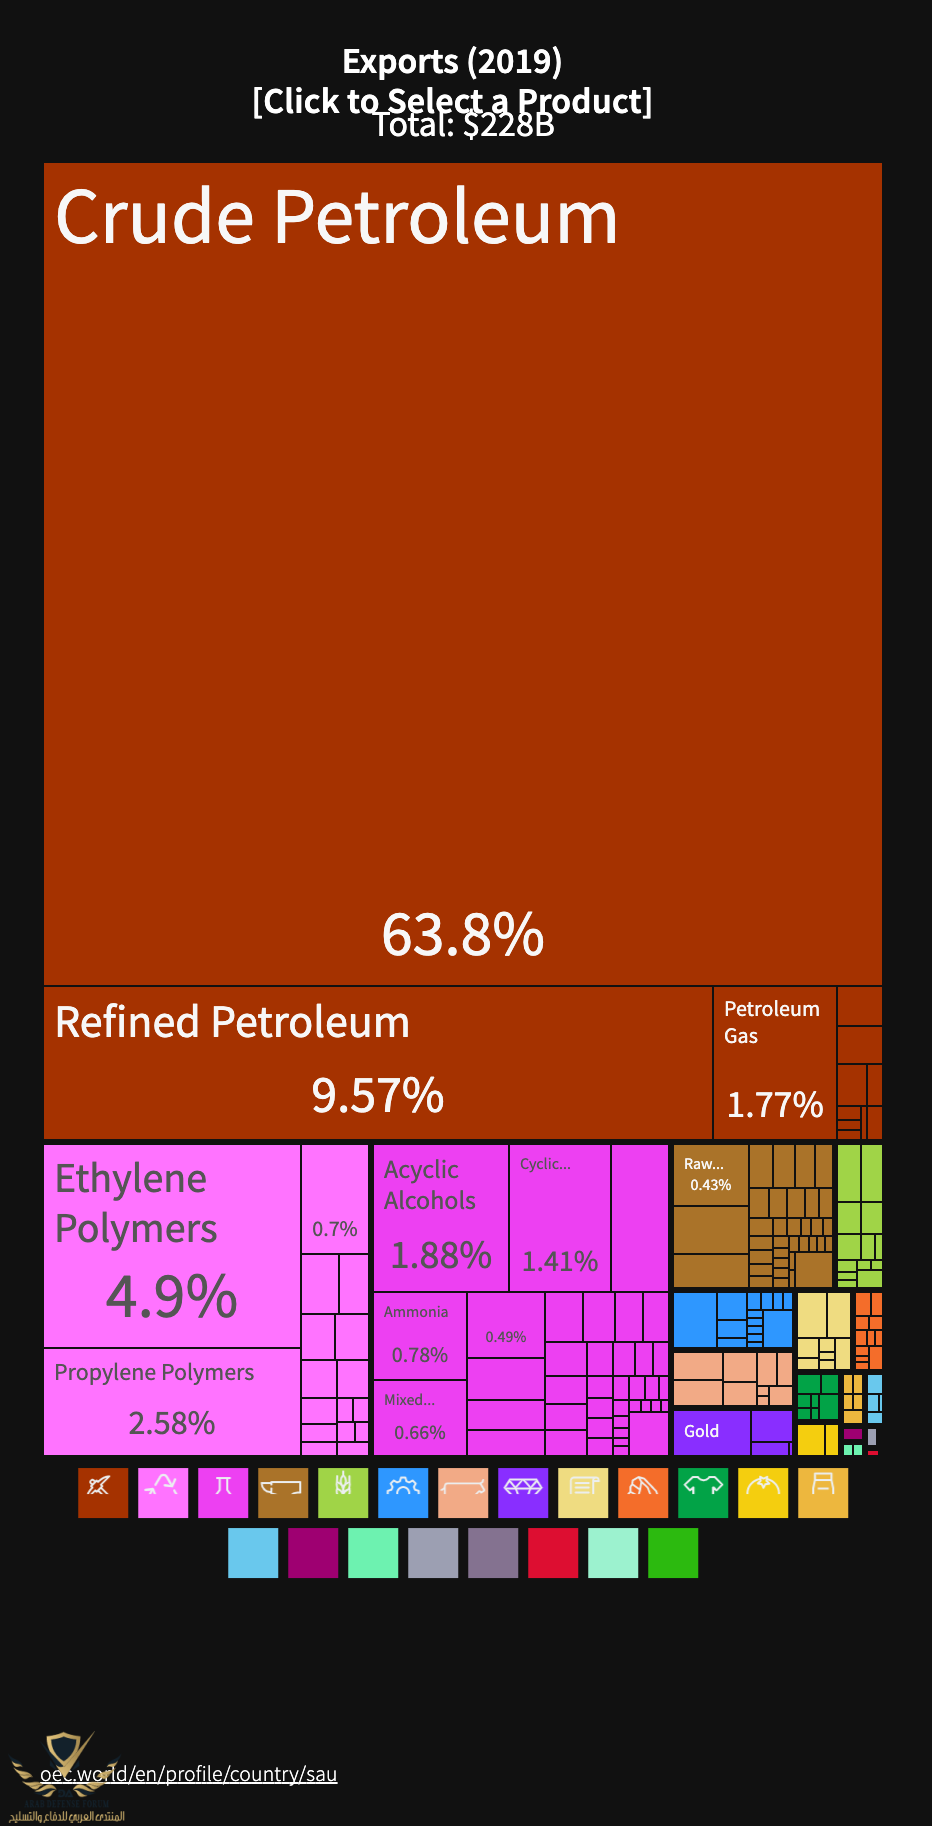 Exports-2019---Click-to-Select-a-Product (2).png